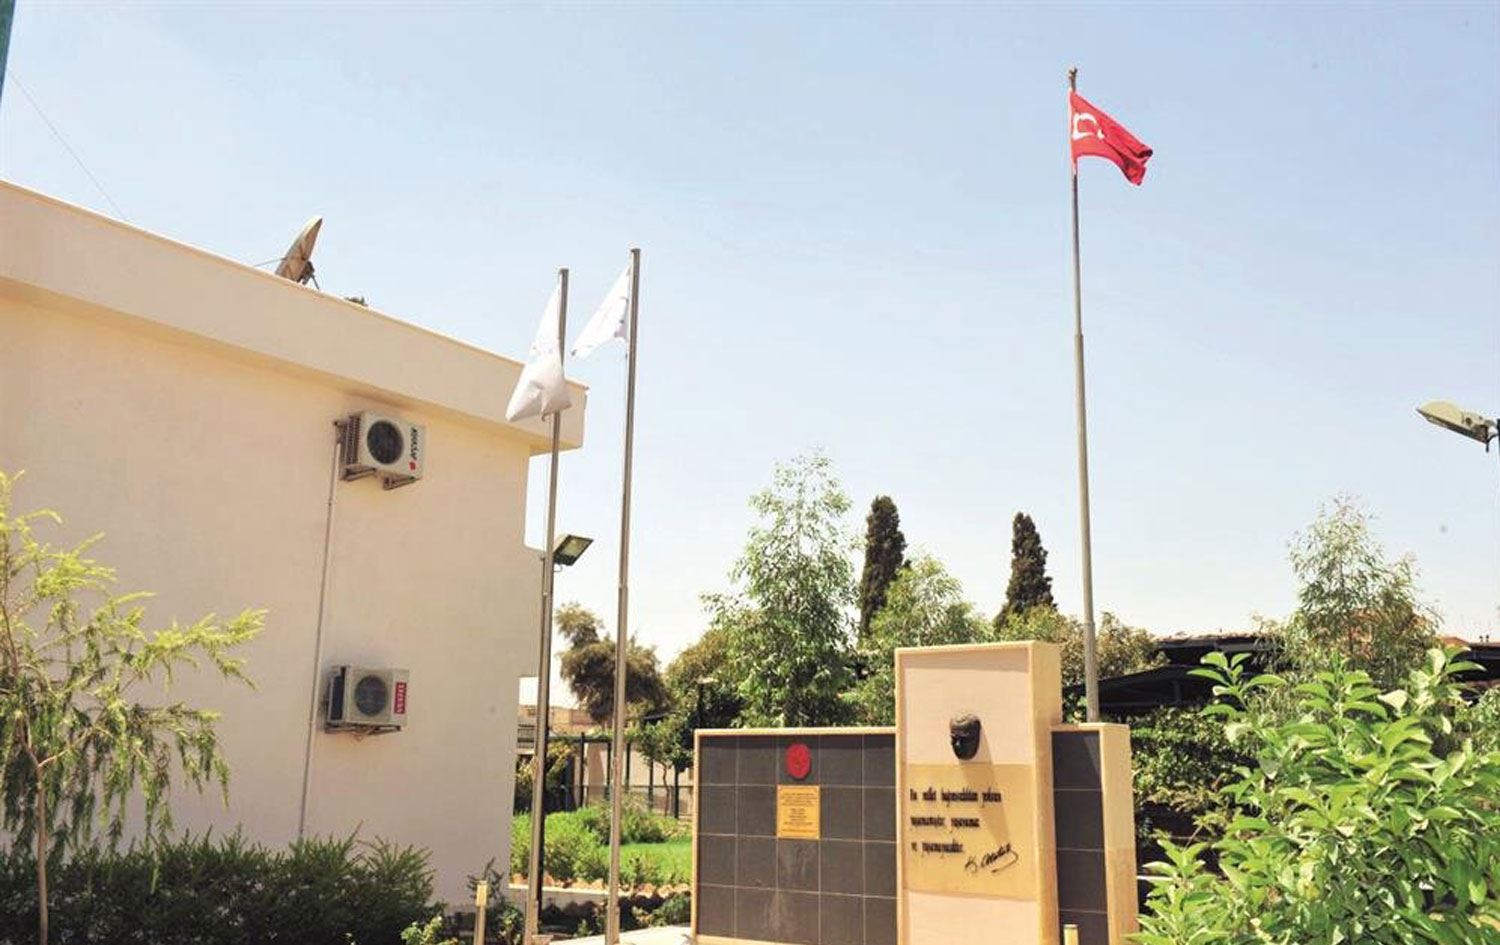 Türkiye's consulate in Mosul targeted in rocket attack during UNSC meeting over Zakho strike